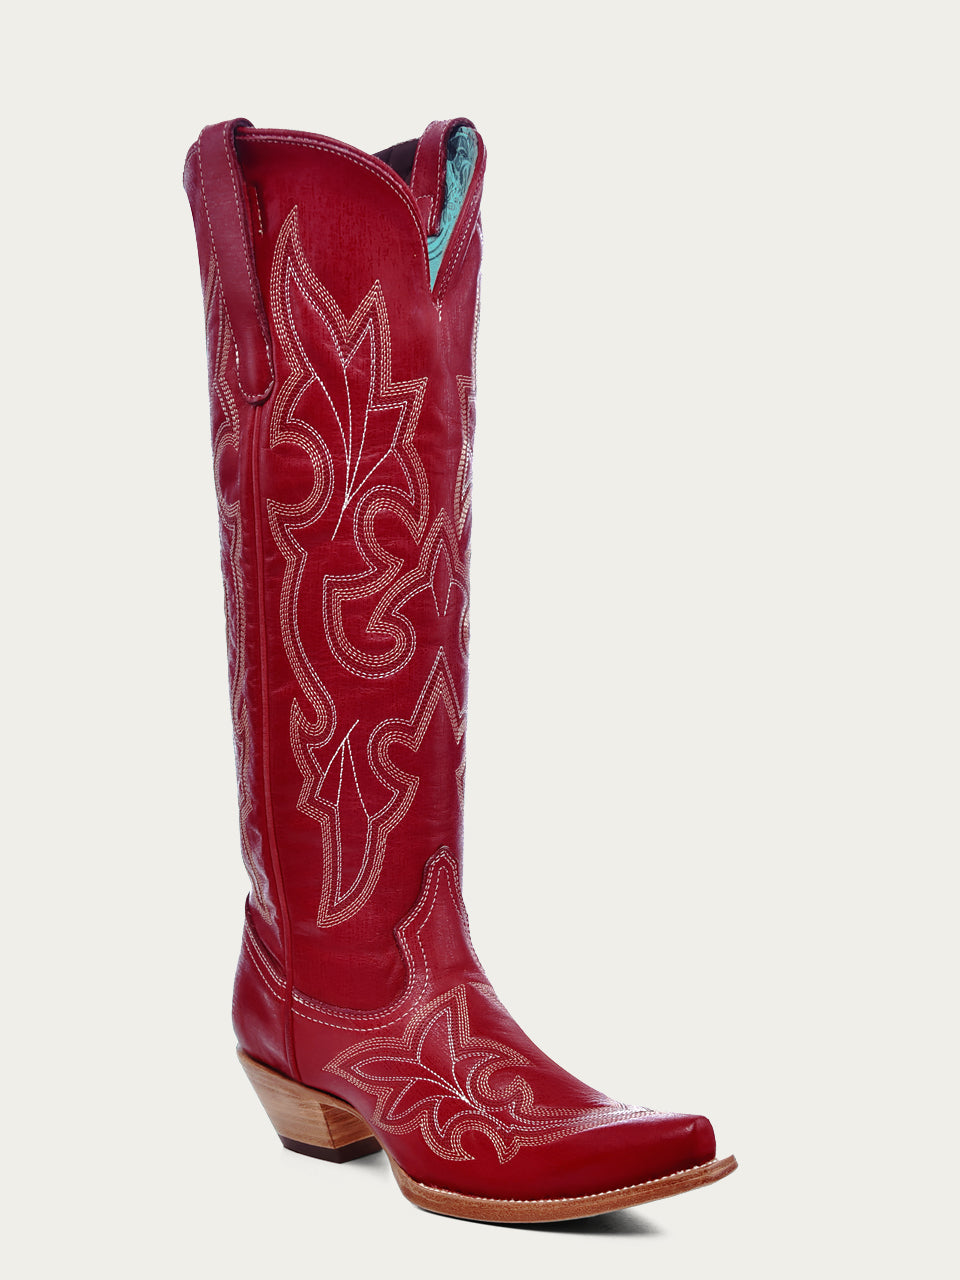 A4465 - WOMEN'S EMBROIDERY TALL TOP RED SNIP TOE COWBOY BOOT